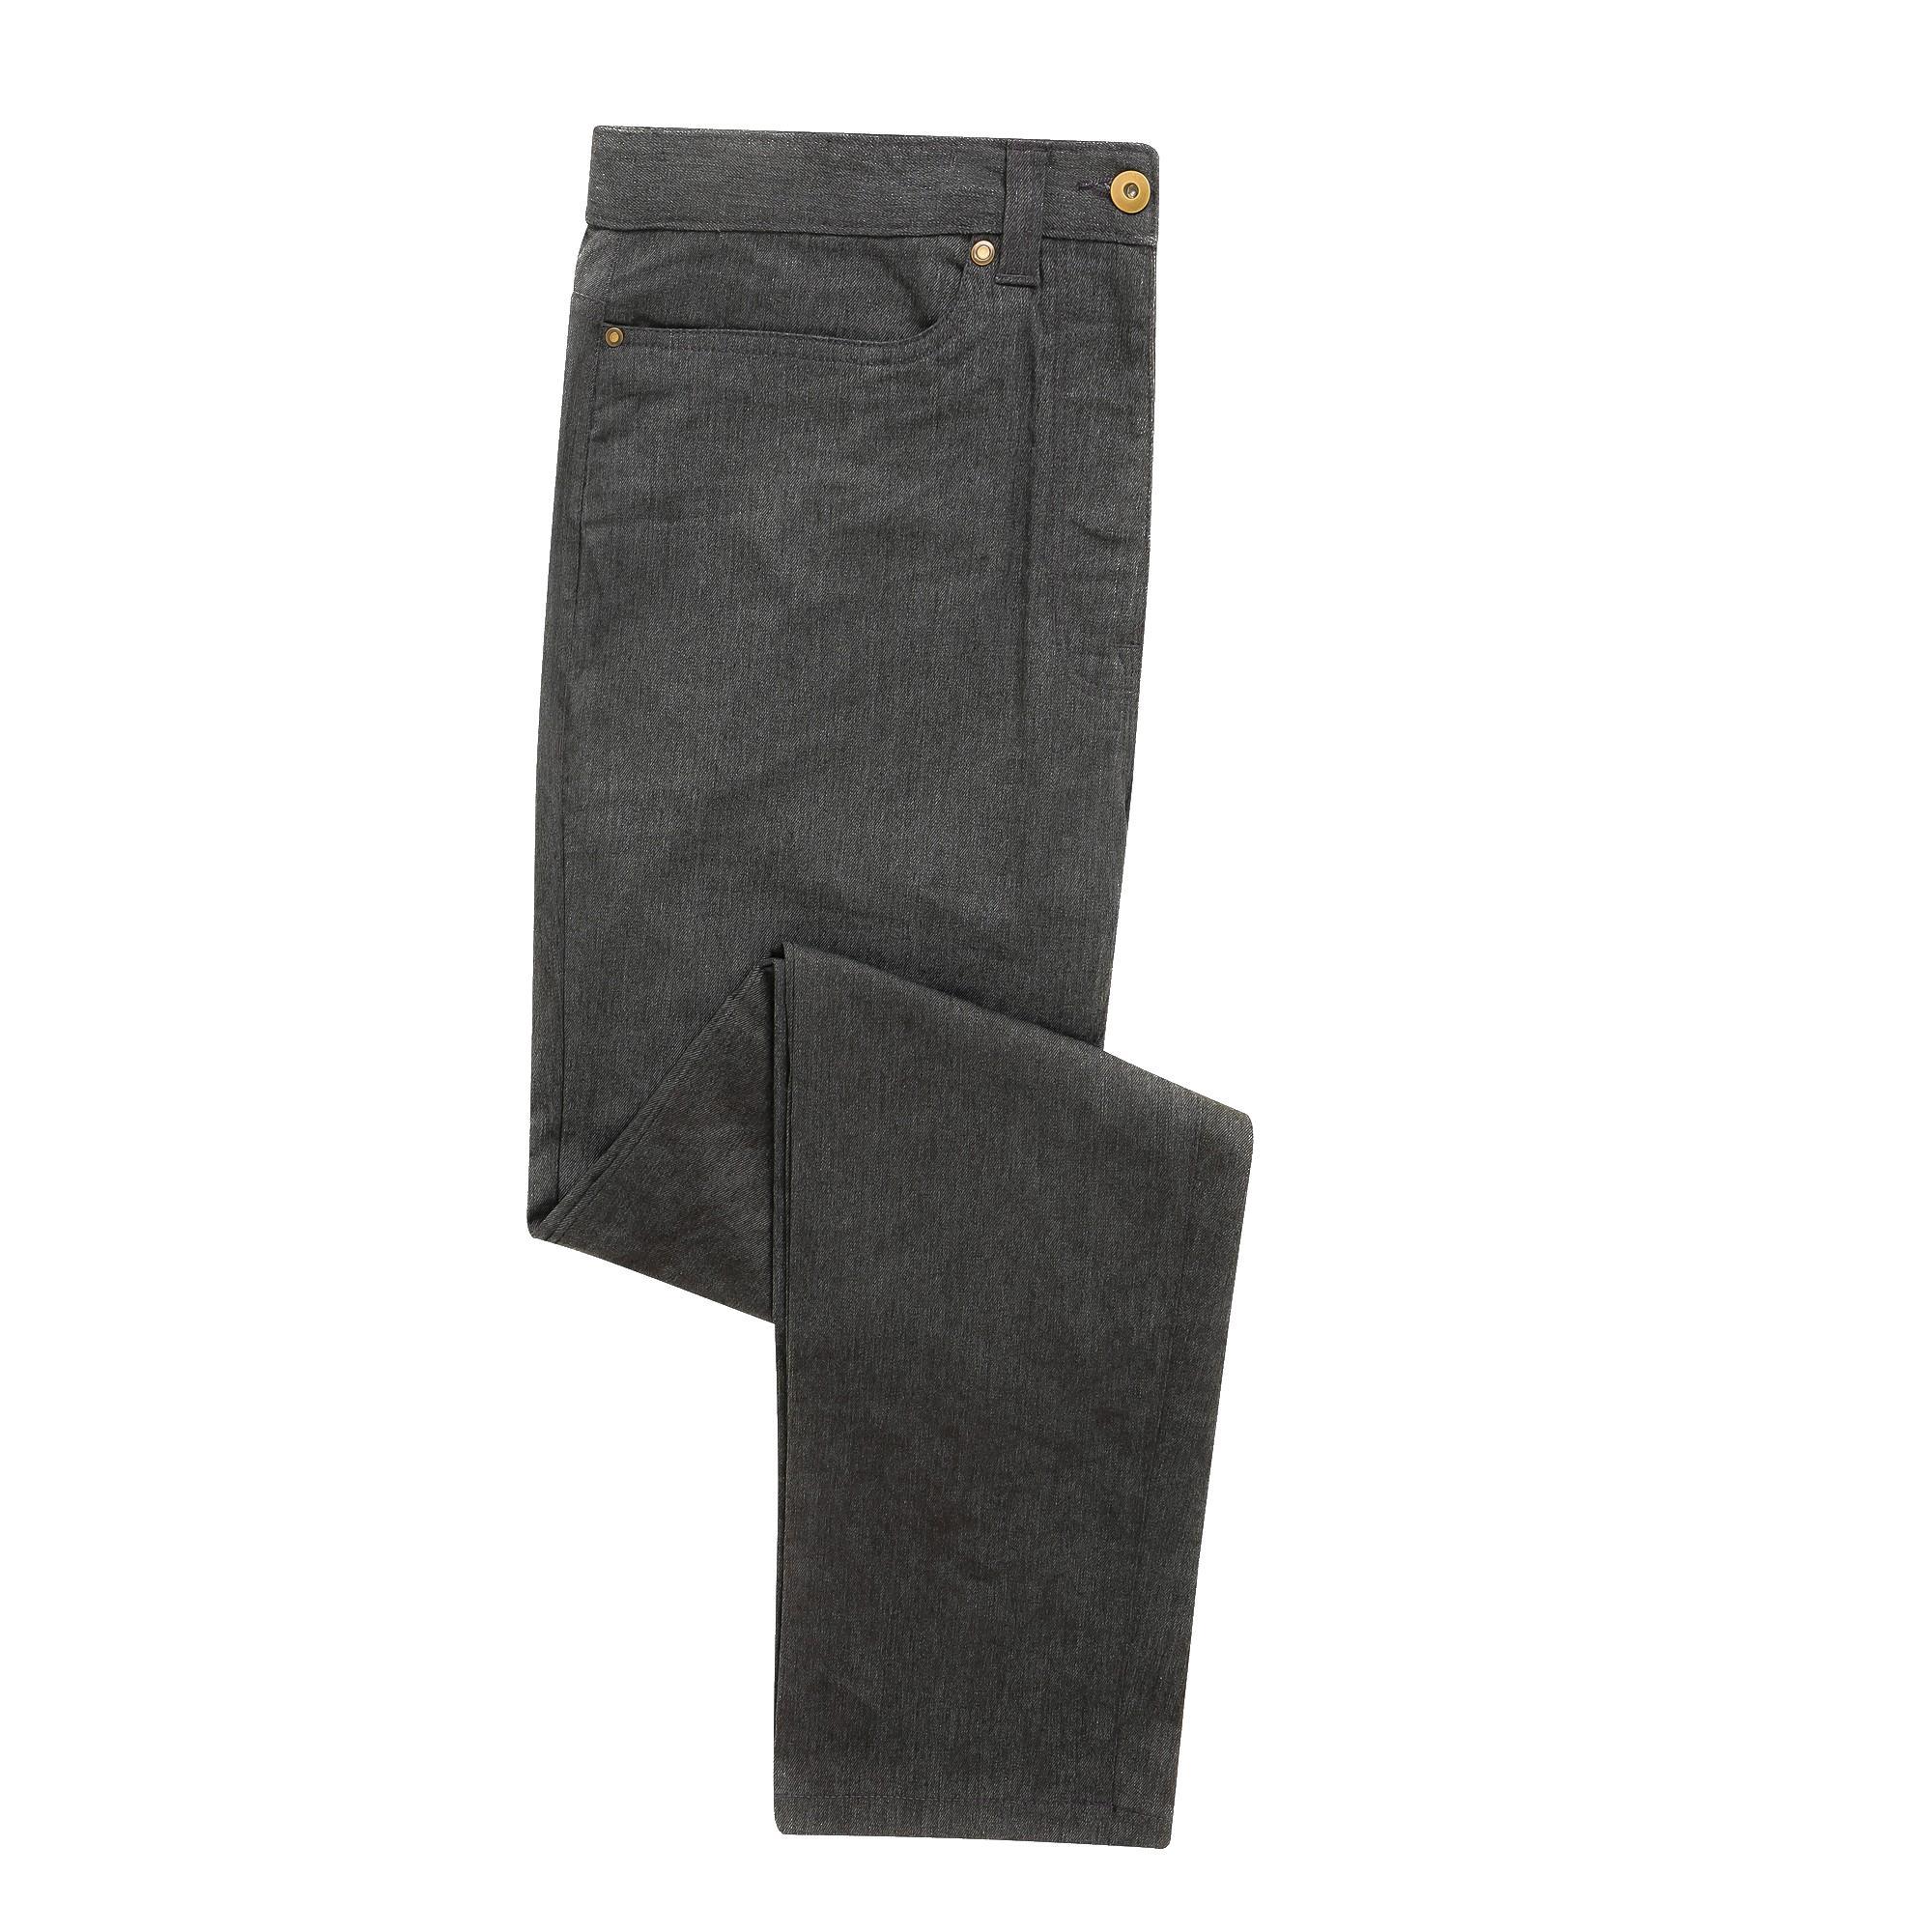 Premier Mens Performance Chinos (Charcoal) (36L)